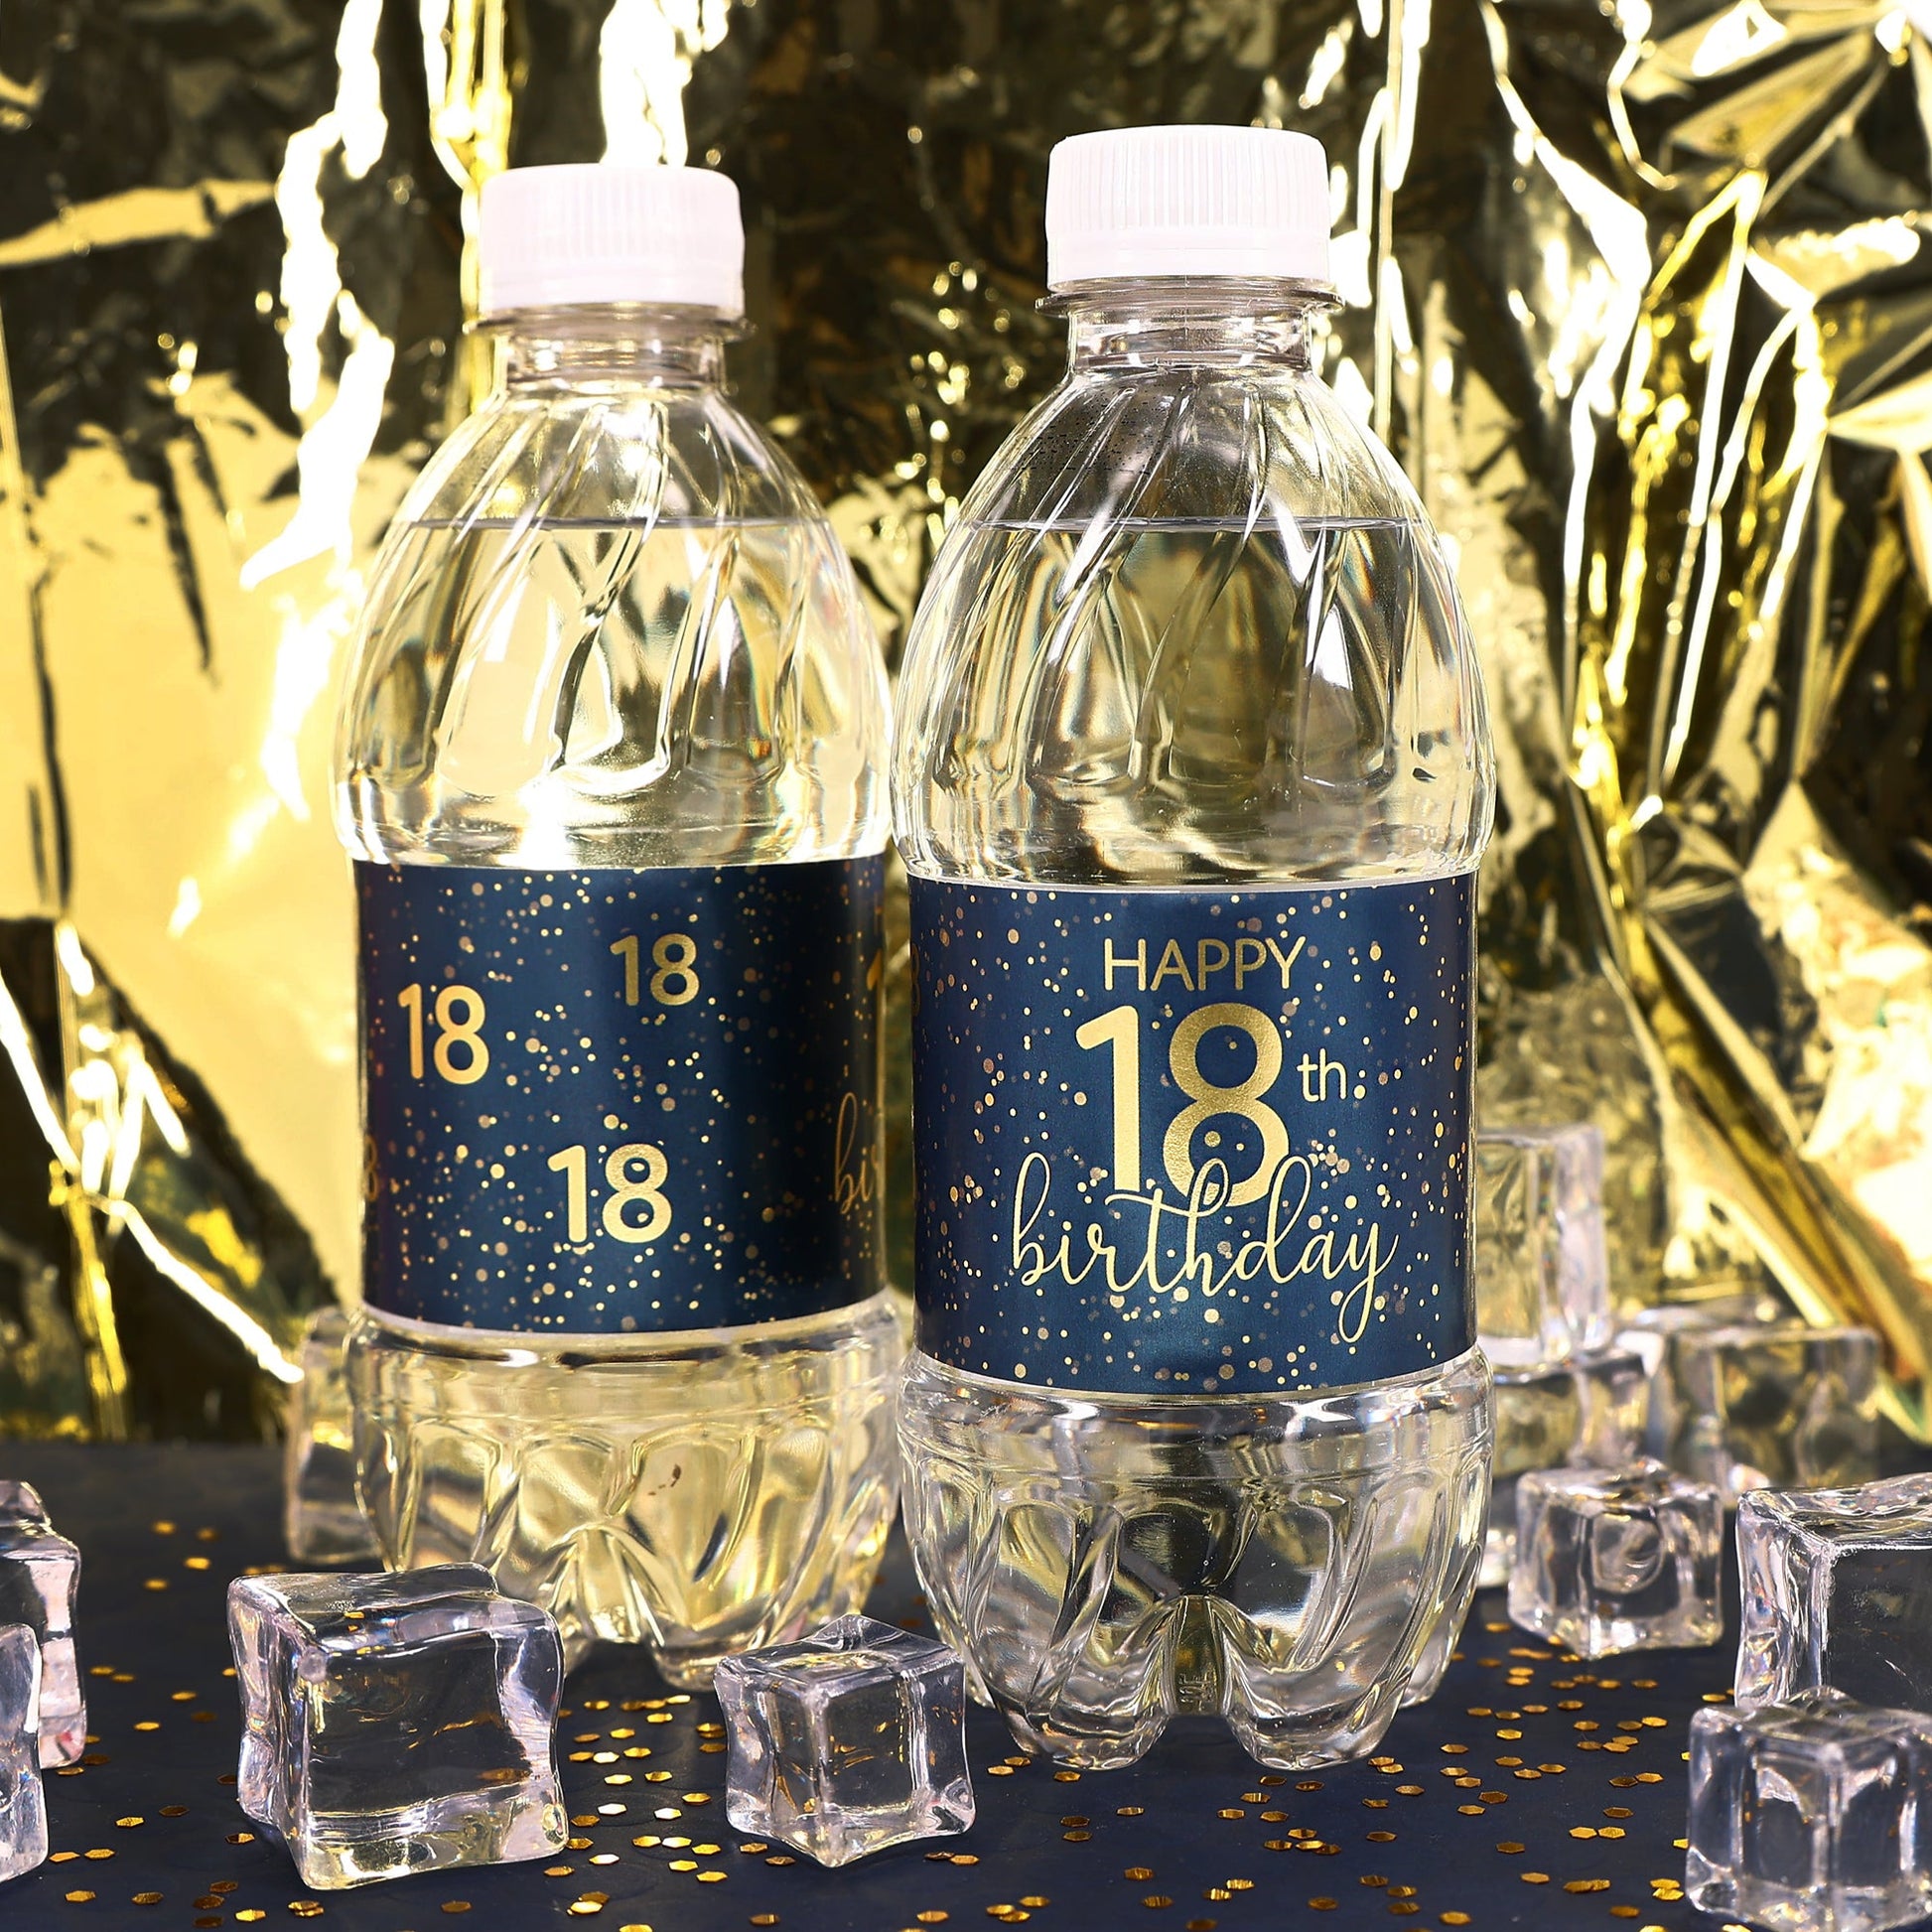 A close-up view of a navy blue water bottle label with gold lettering that reads "Happy 18th Birthday" and features a sleek, modern design.